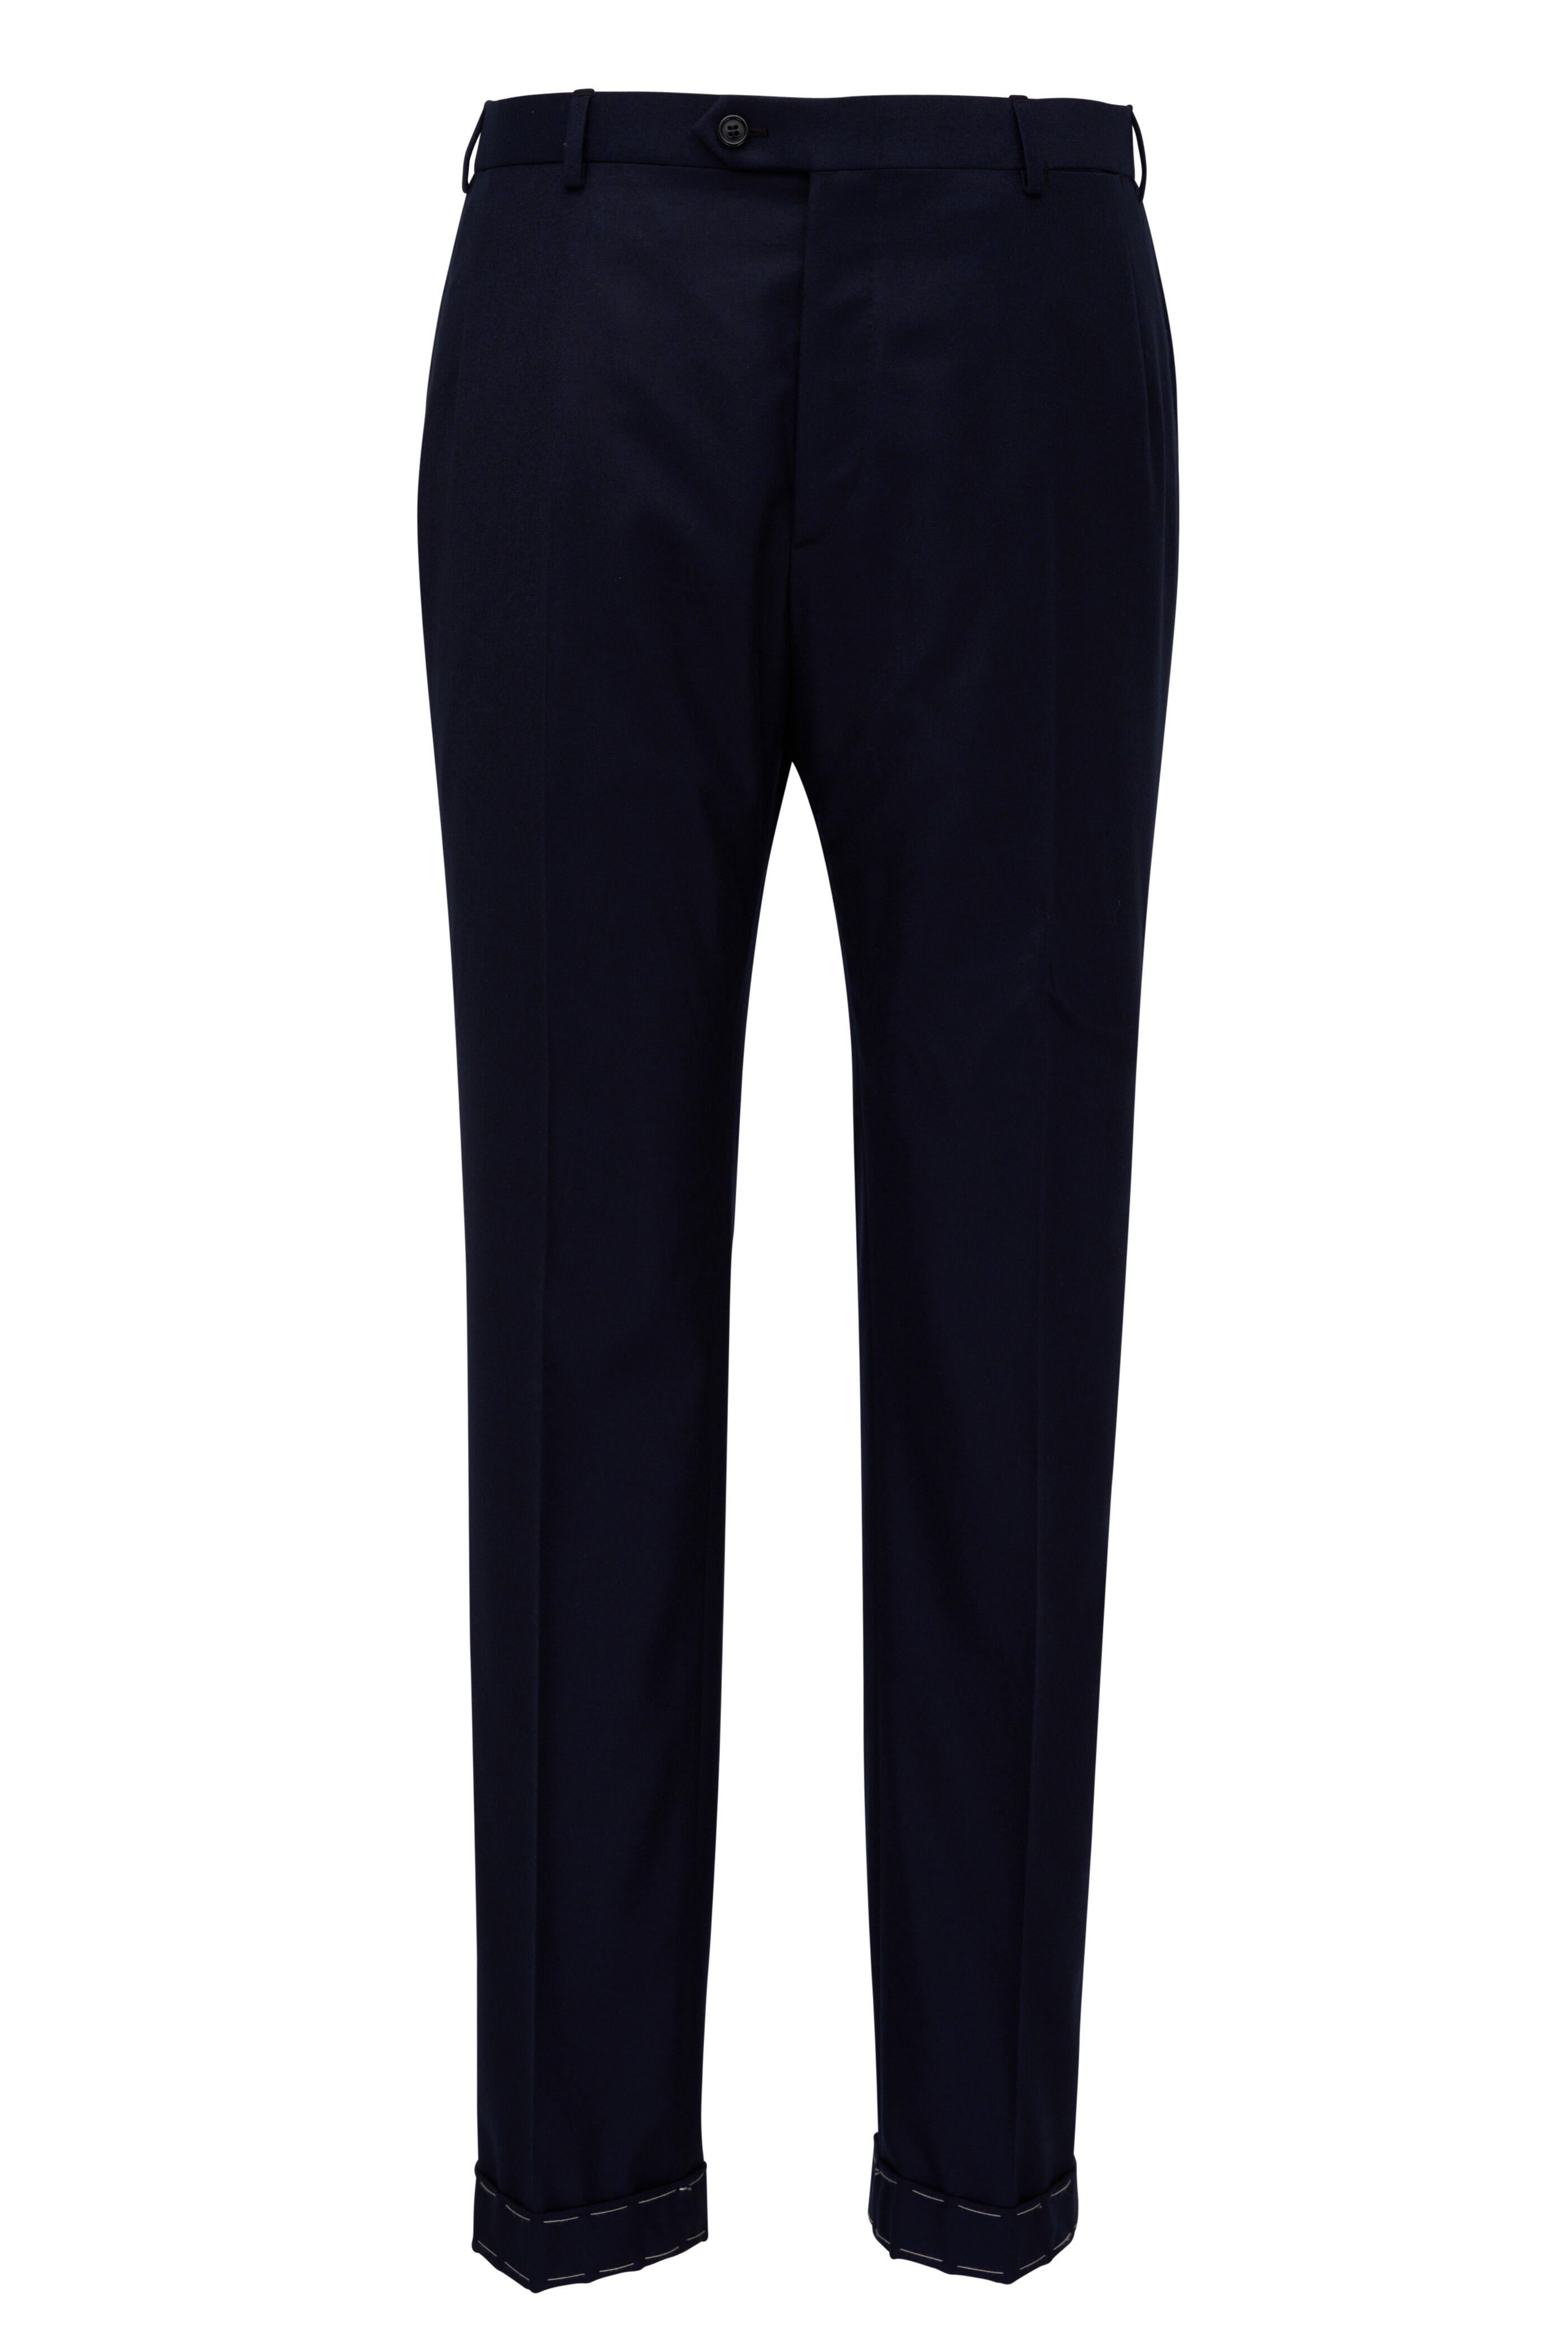 Brioni - Brushed Navy Blue Wool Suit | Mitchell Stores